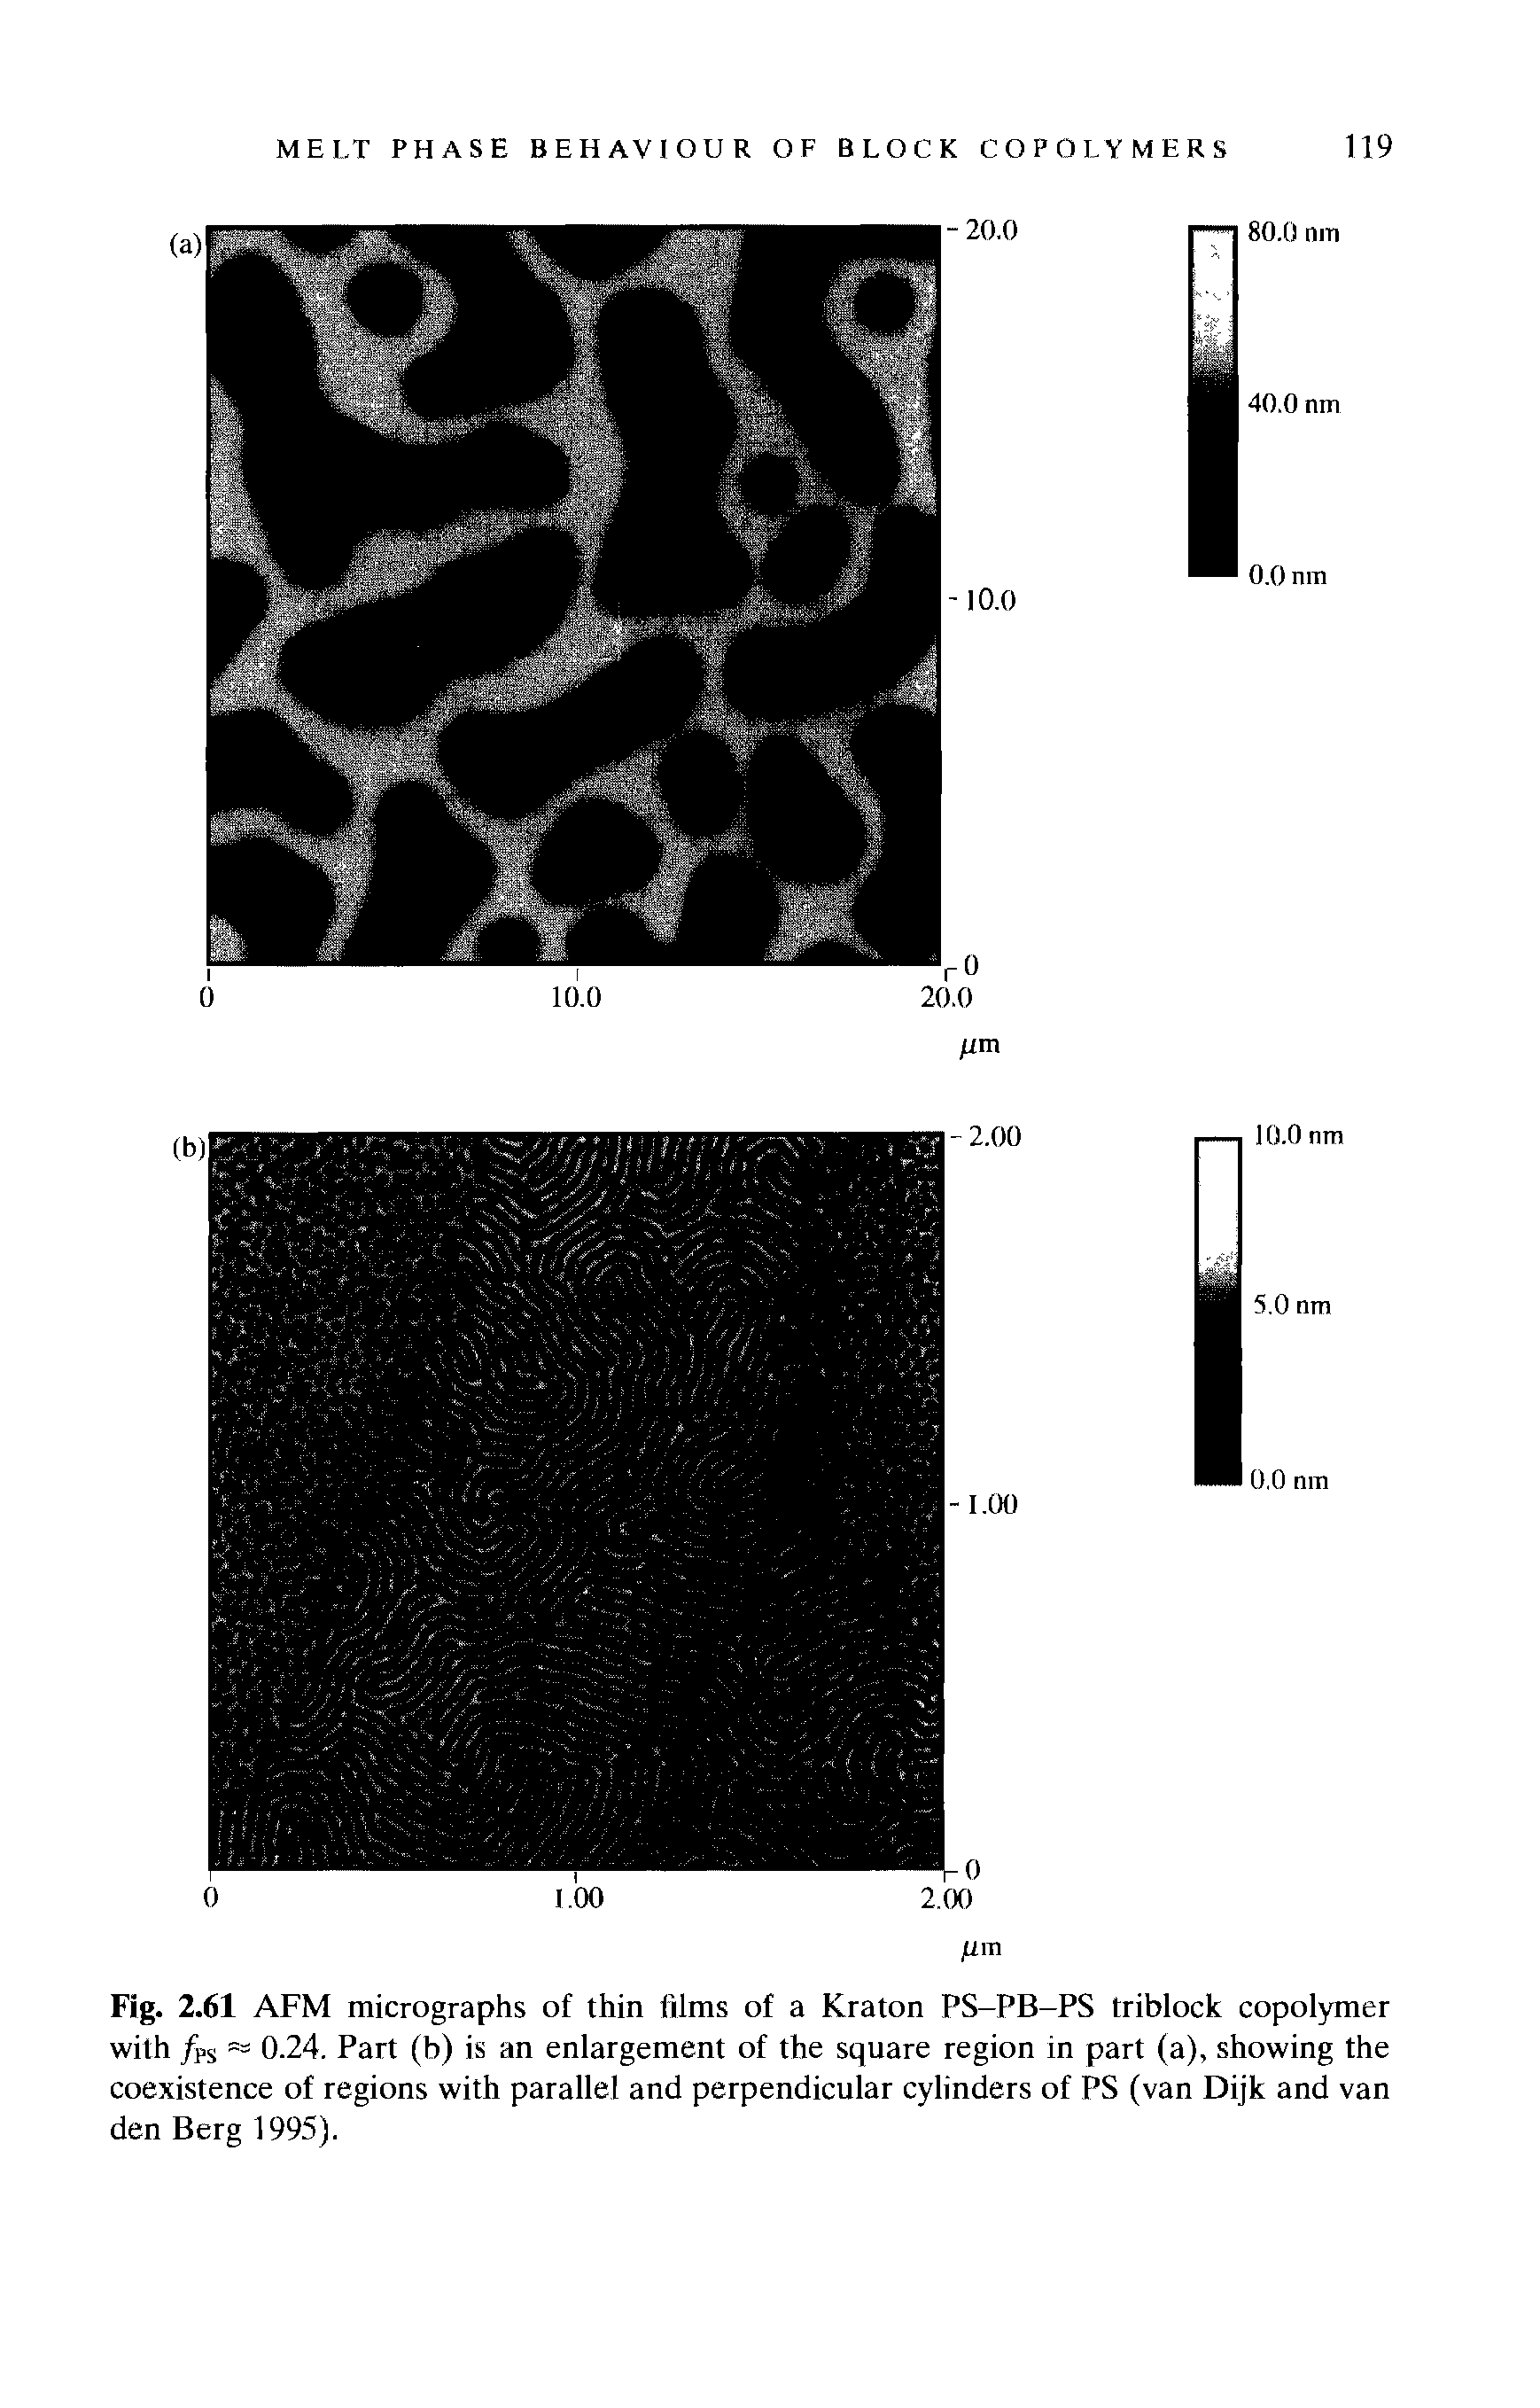 Fig. 2.61 AFM micrographs of thin films of a Kraton PS-PB-PS triblock copolymer with /pS == 0.24. Part (b) is an enlargement of the square region in part (a), showing the coexistence of regions with parallel and perpendicular cylinders of PS (van Dijk and van den Berg 1995).